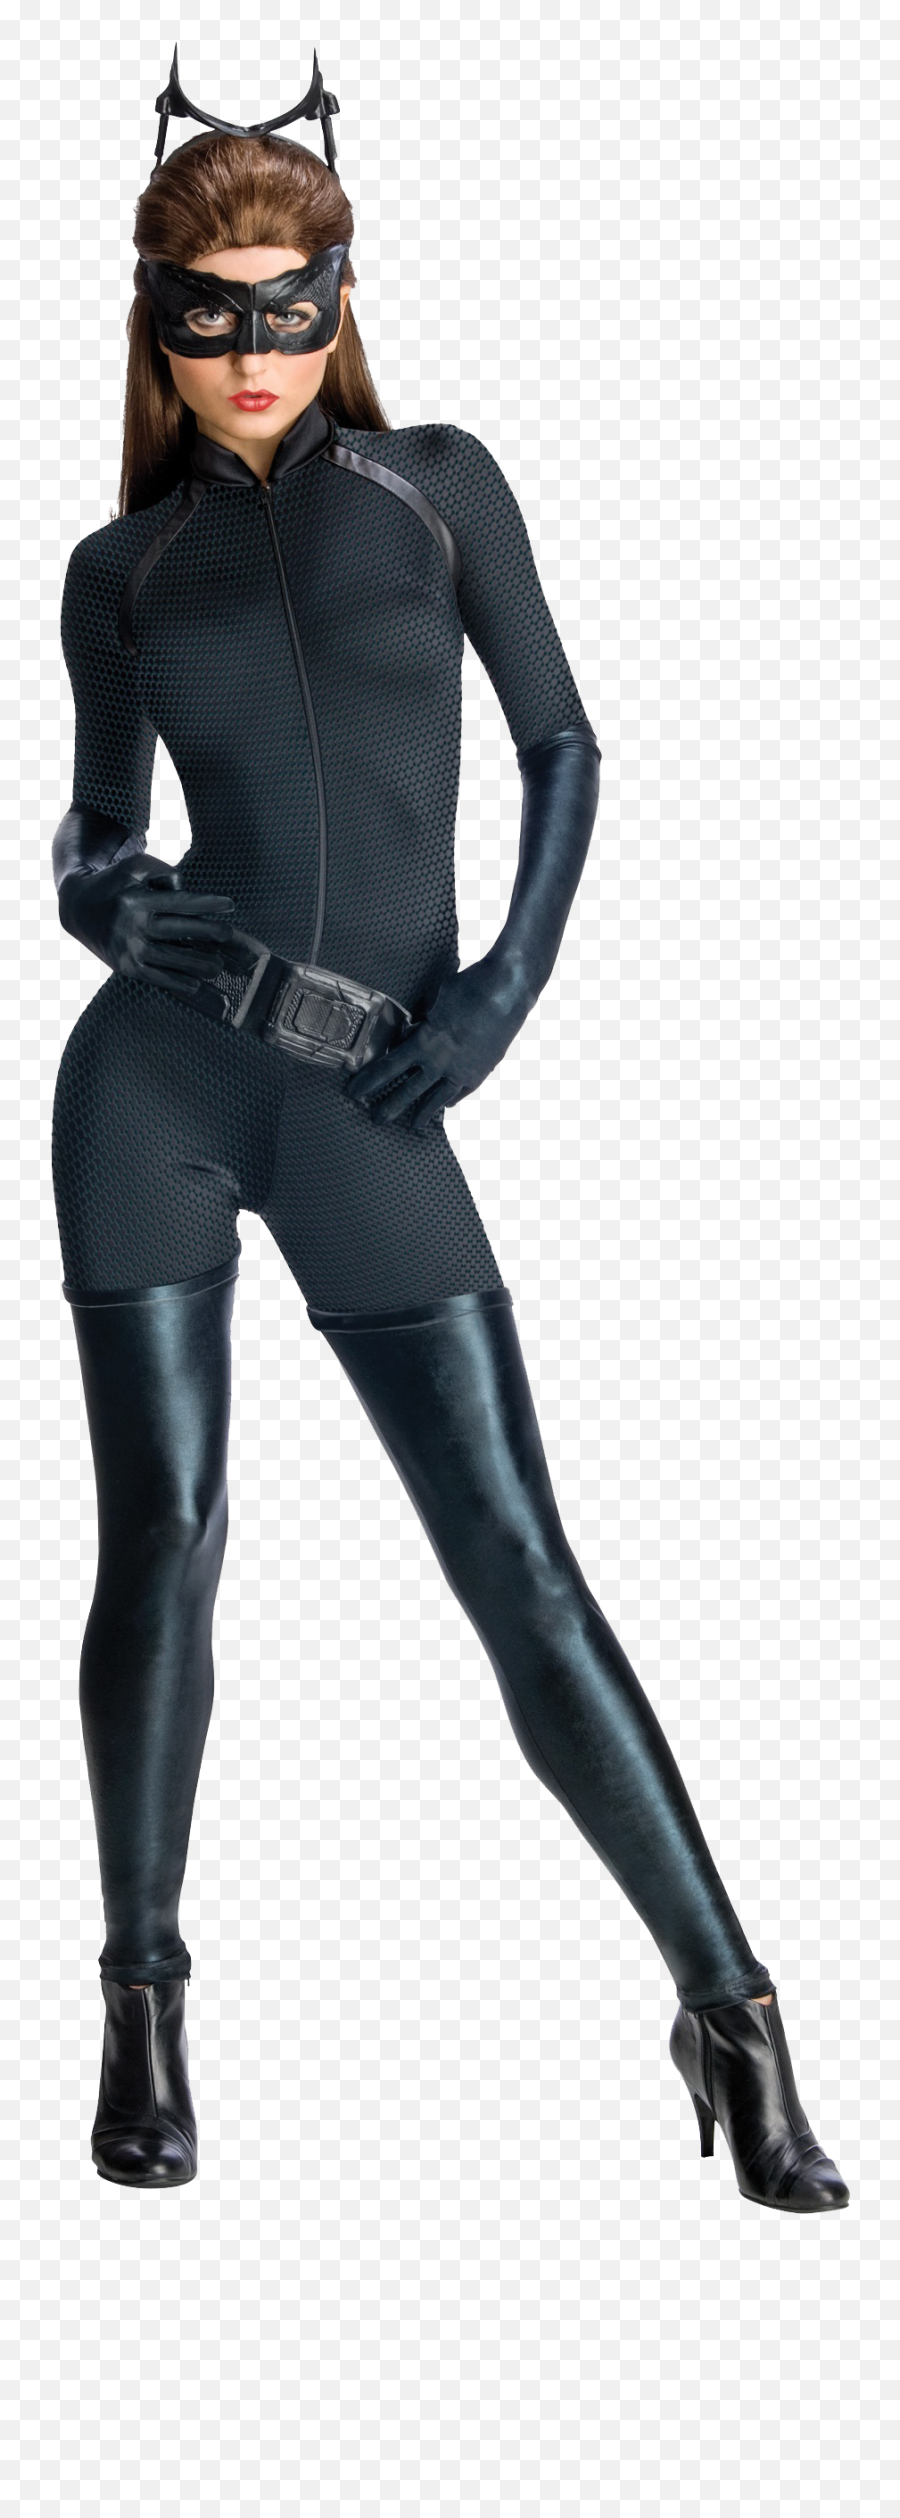 Catwoman Png Hd - Women Superhero Costumes,Catwoman Png